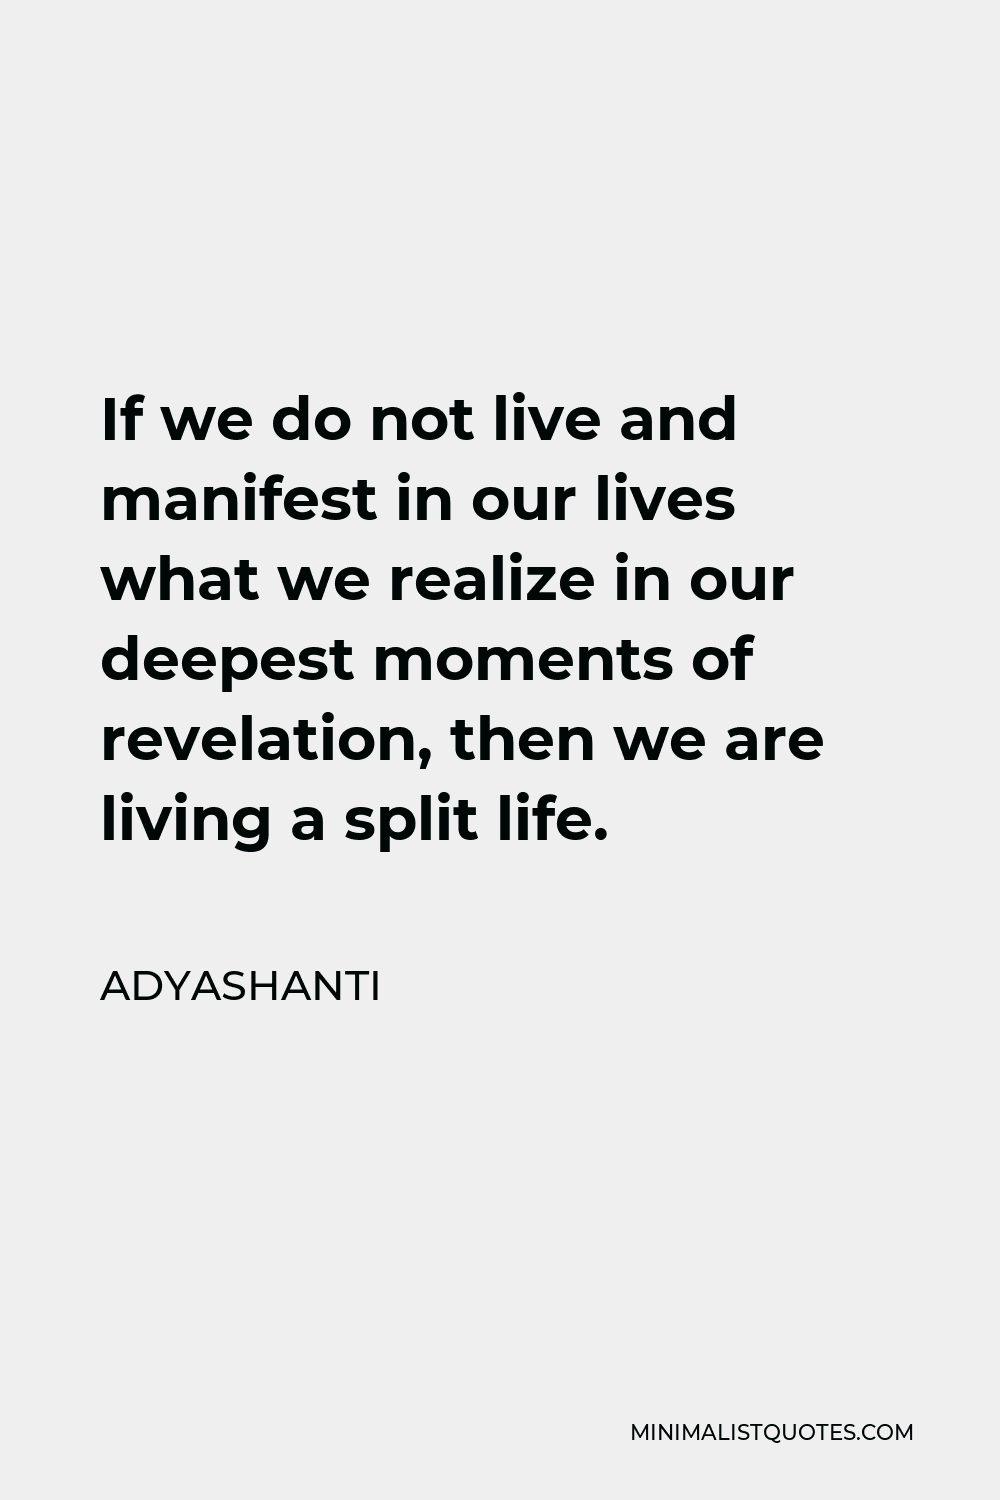 Adyashanti Quote - If we do not live and manifest in our lives what we realize in our deepest moments of revelation, then we are living a split life.